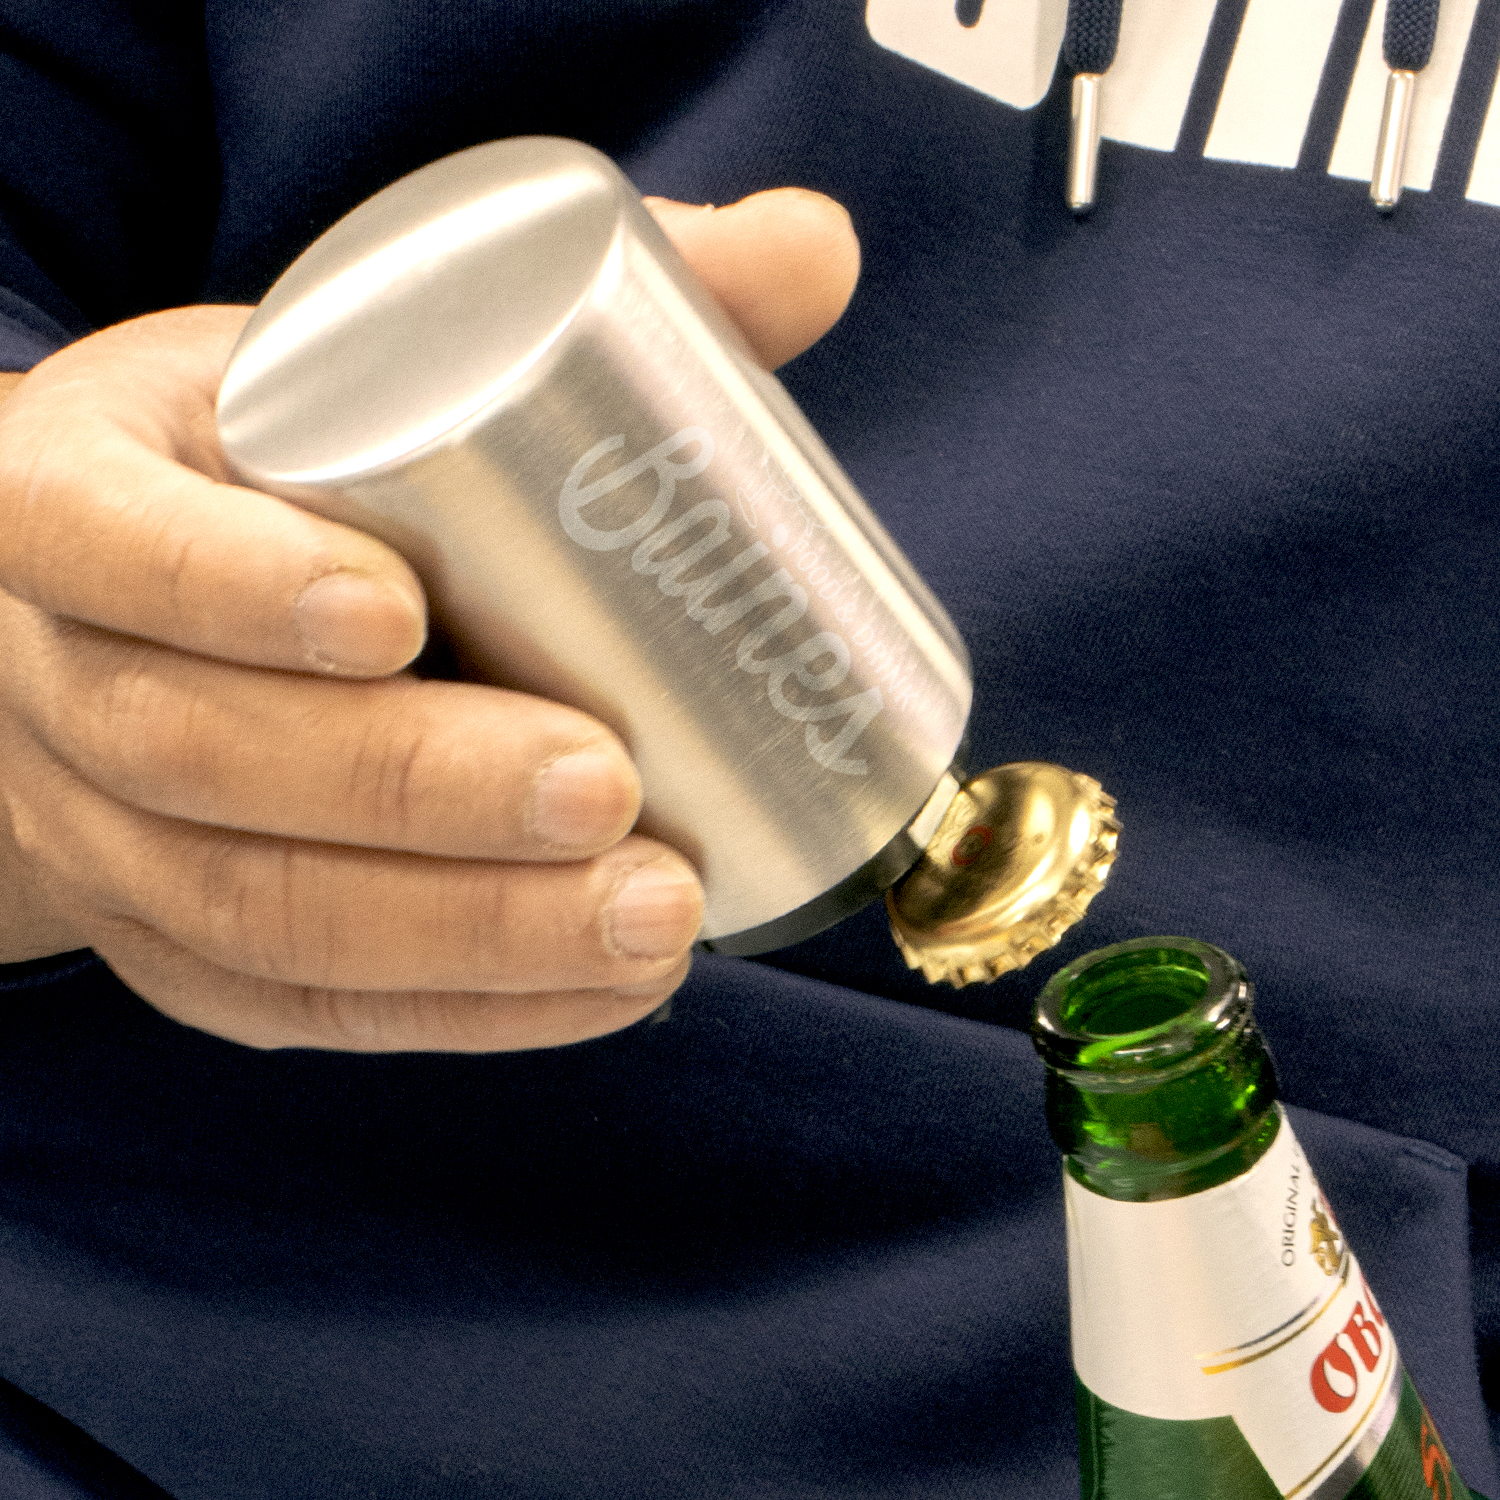 Automatic Bottle Opener Features